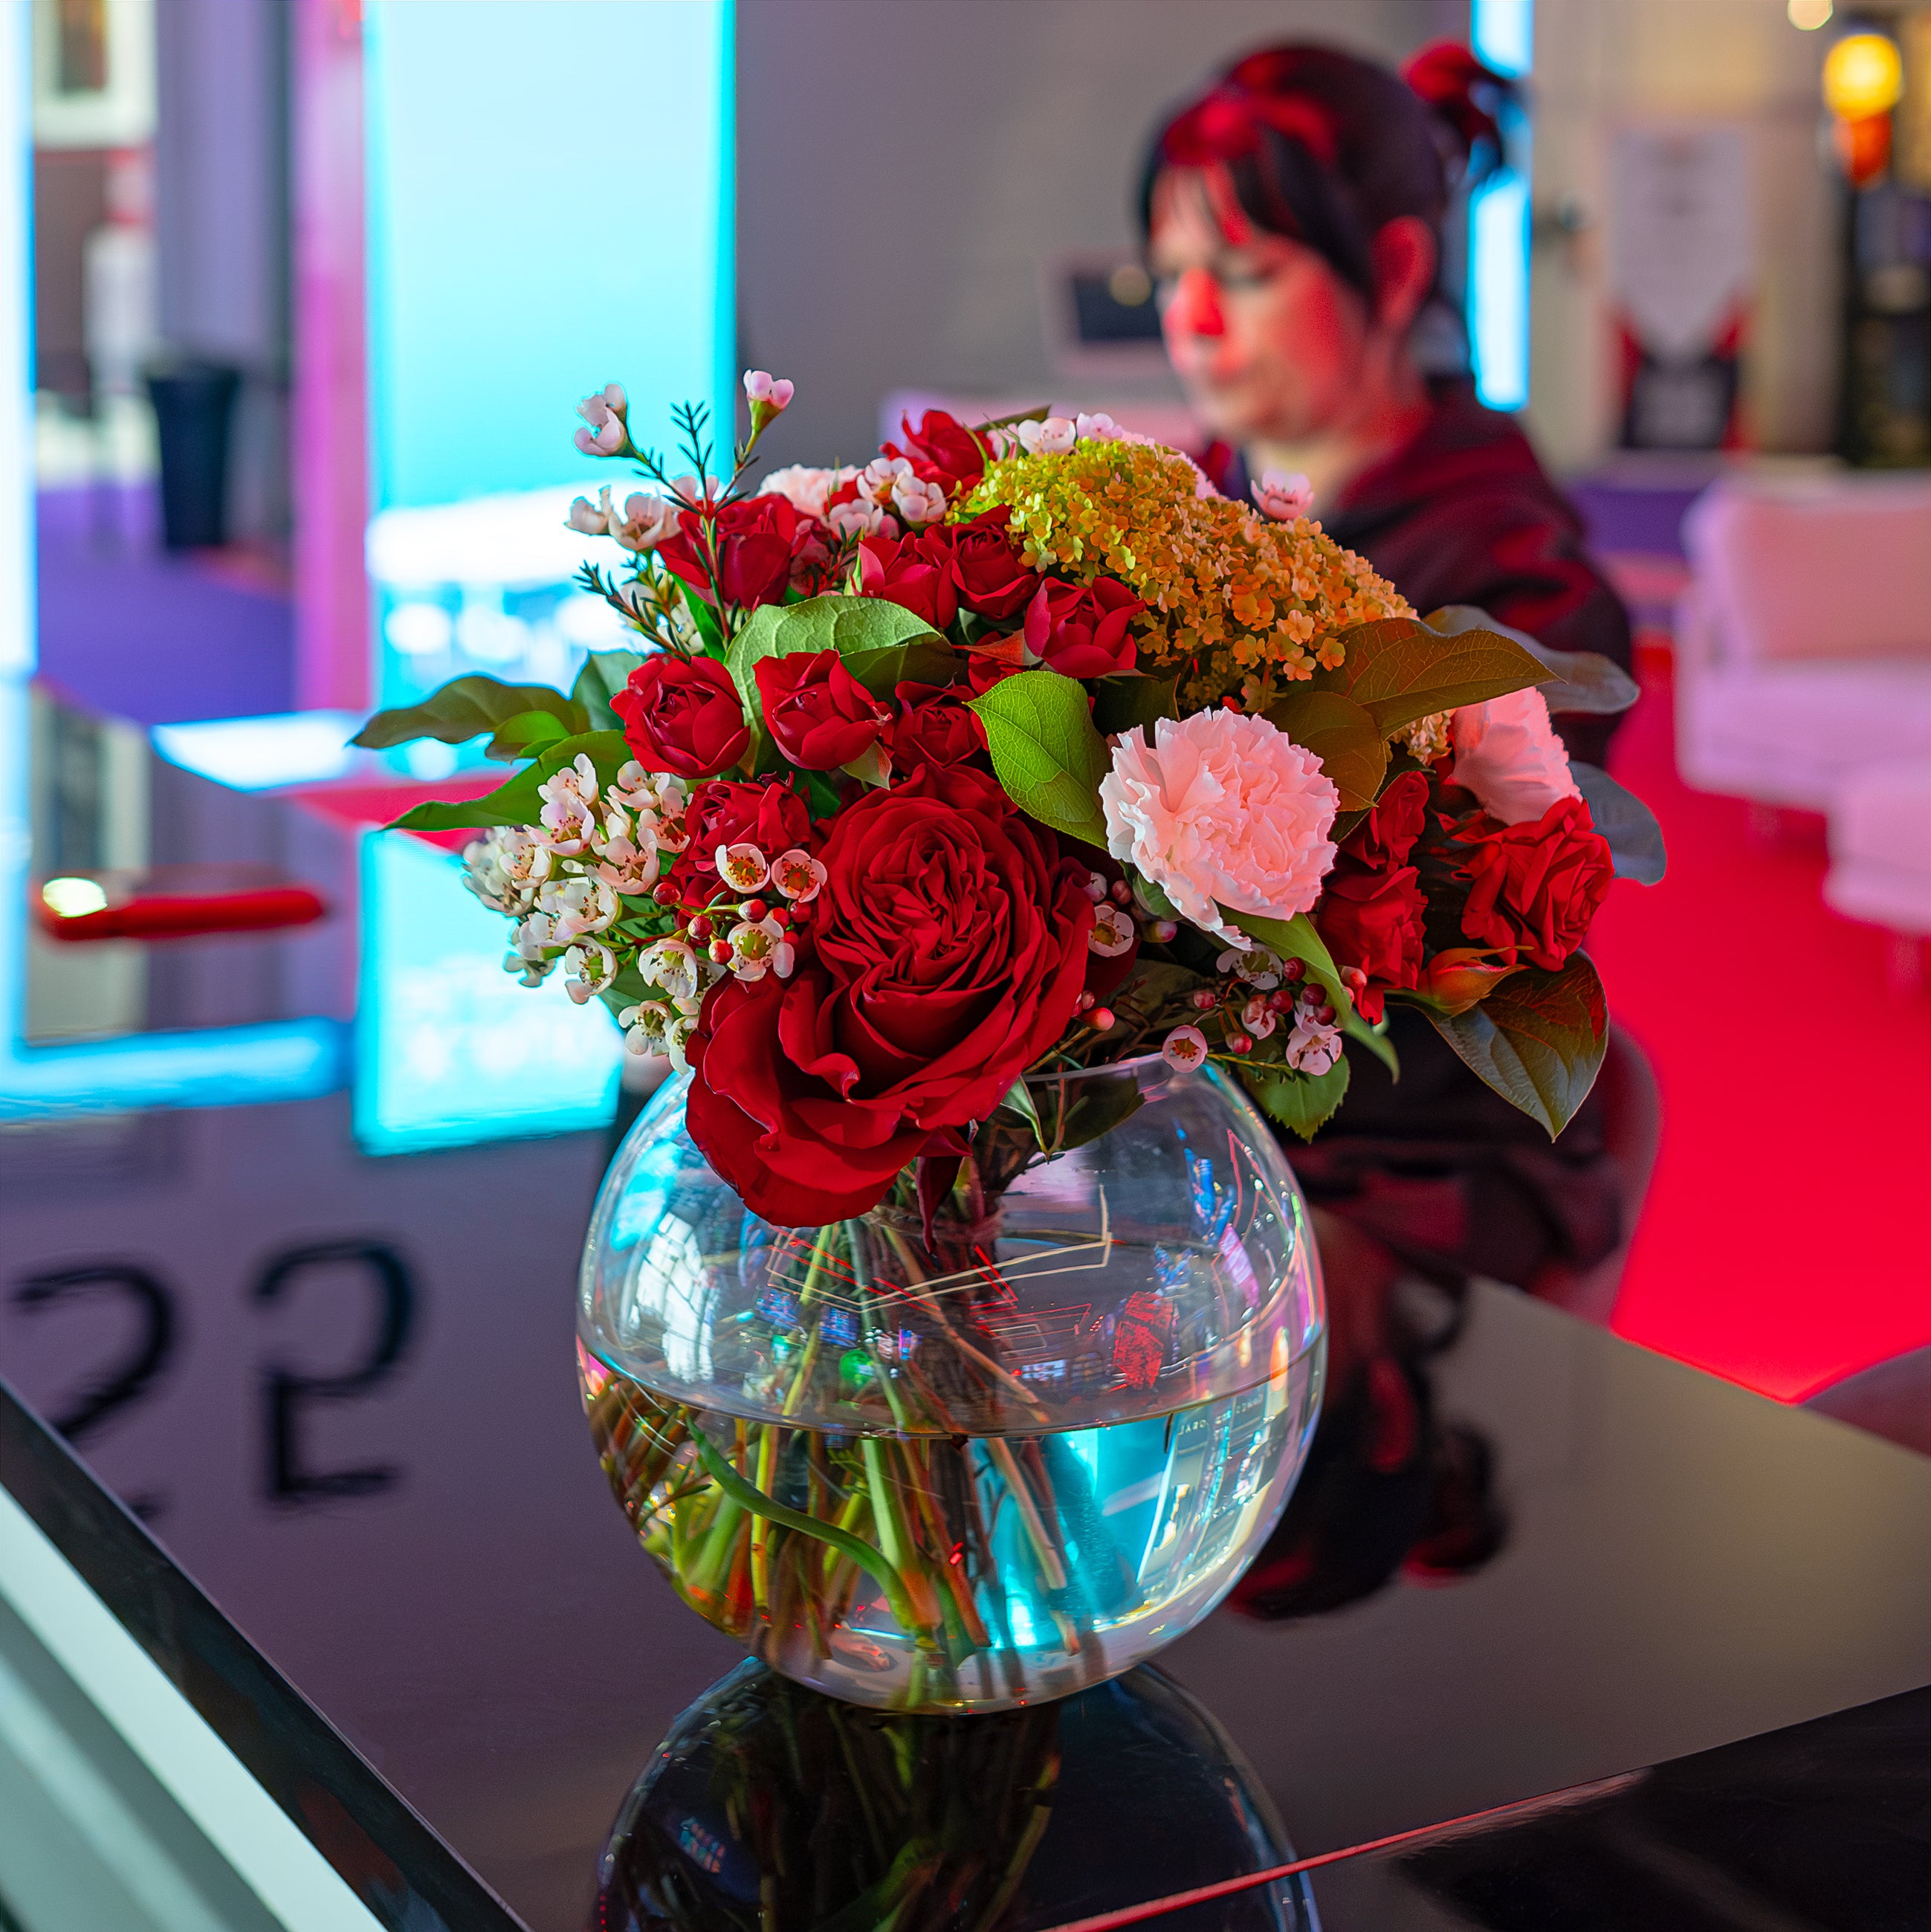 A stunning bespoke luxury bouquet of deep red roses and delicate pink blooms is presented in a glass vase against the vibrant backdrop in an area of the ICE London Exhibition